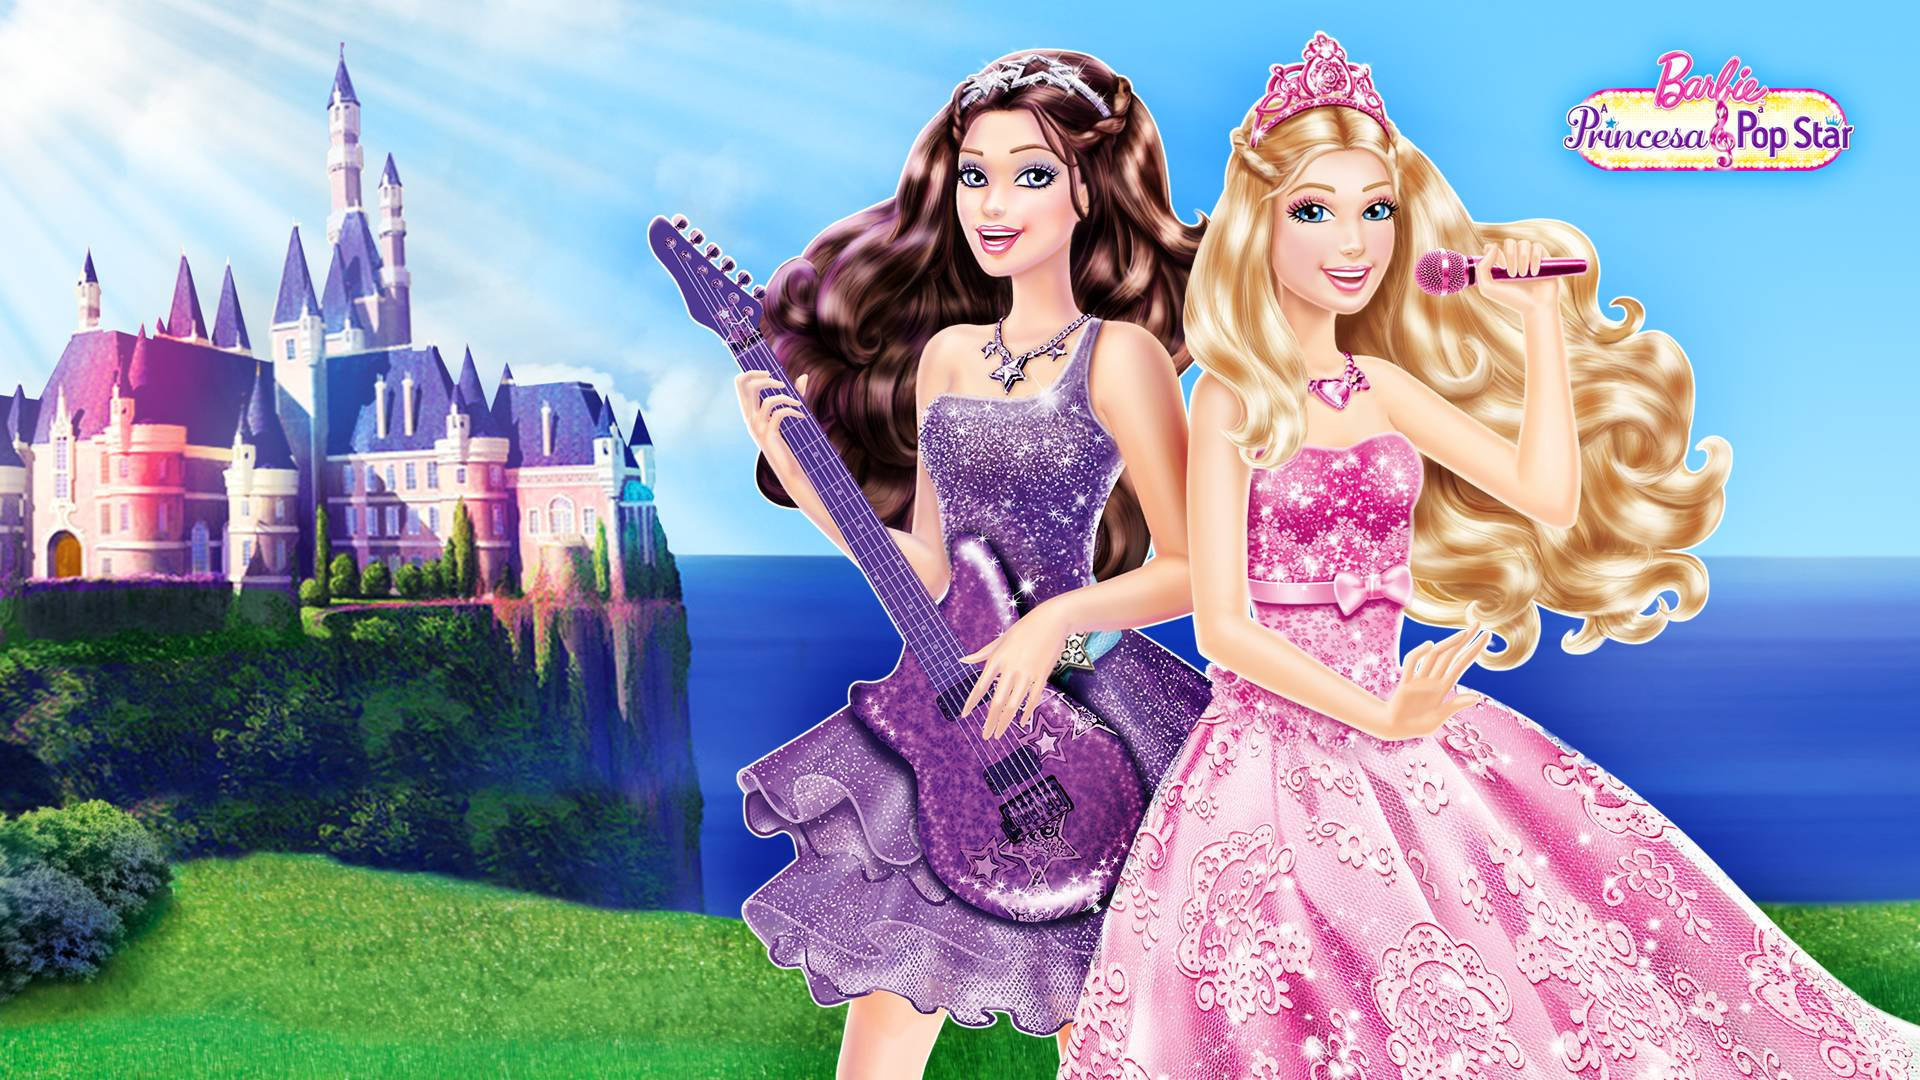 Barbie in the amazing role of Princess and the Popstar! Wallpaper